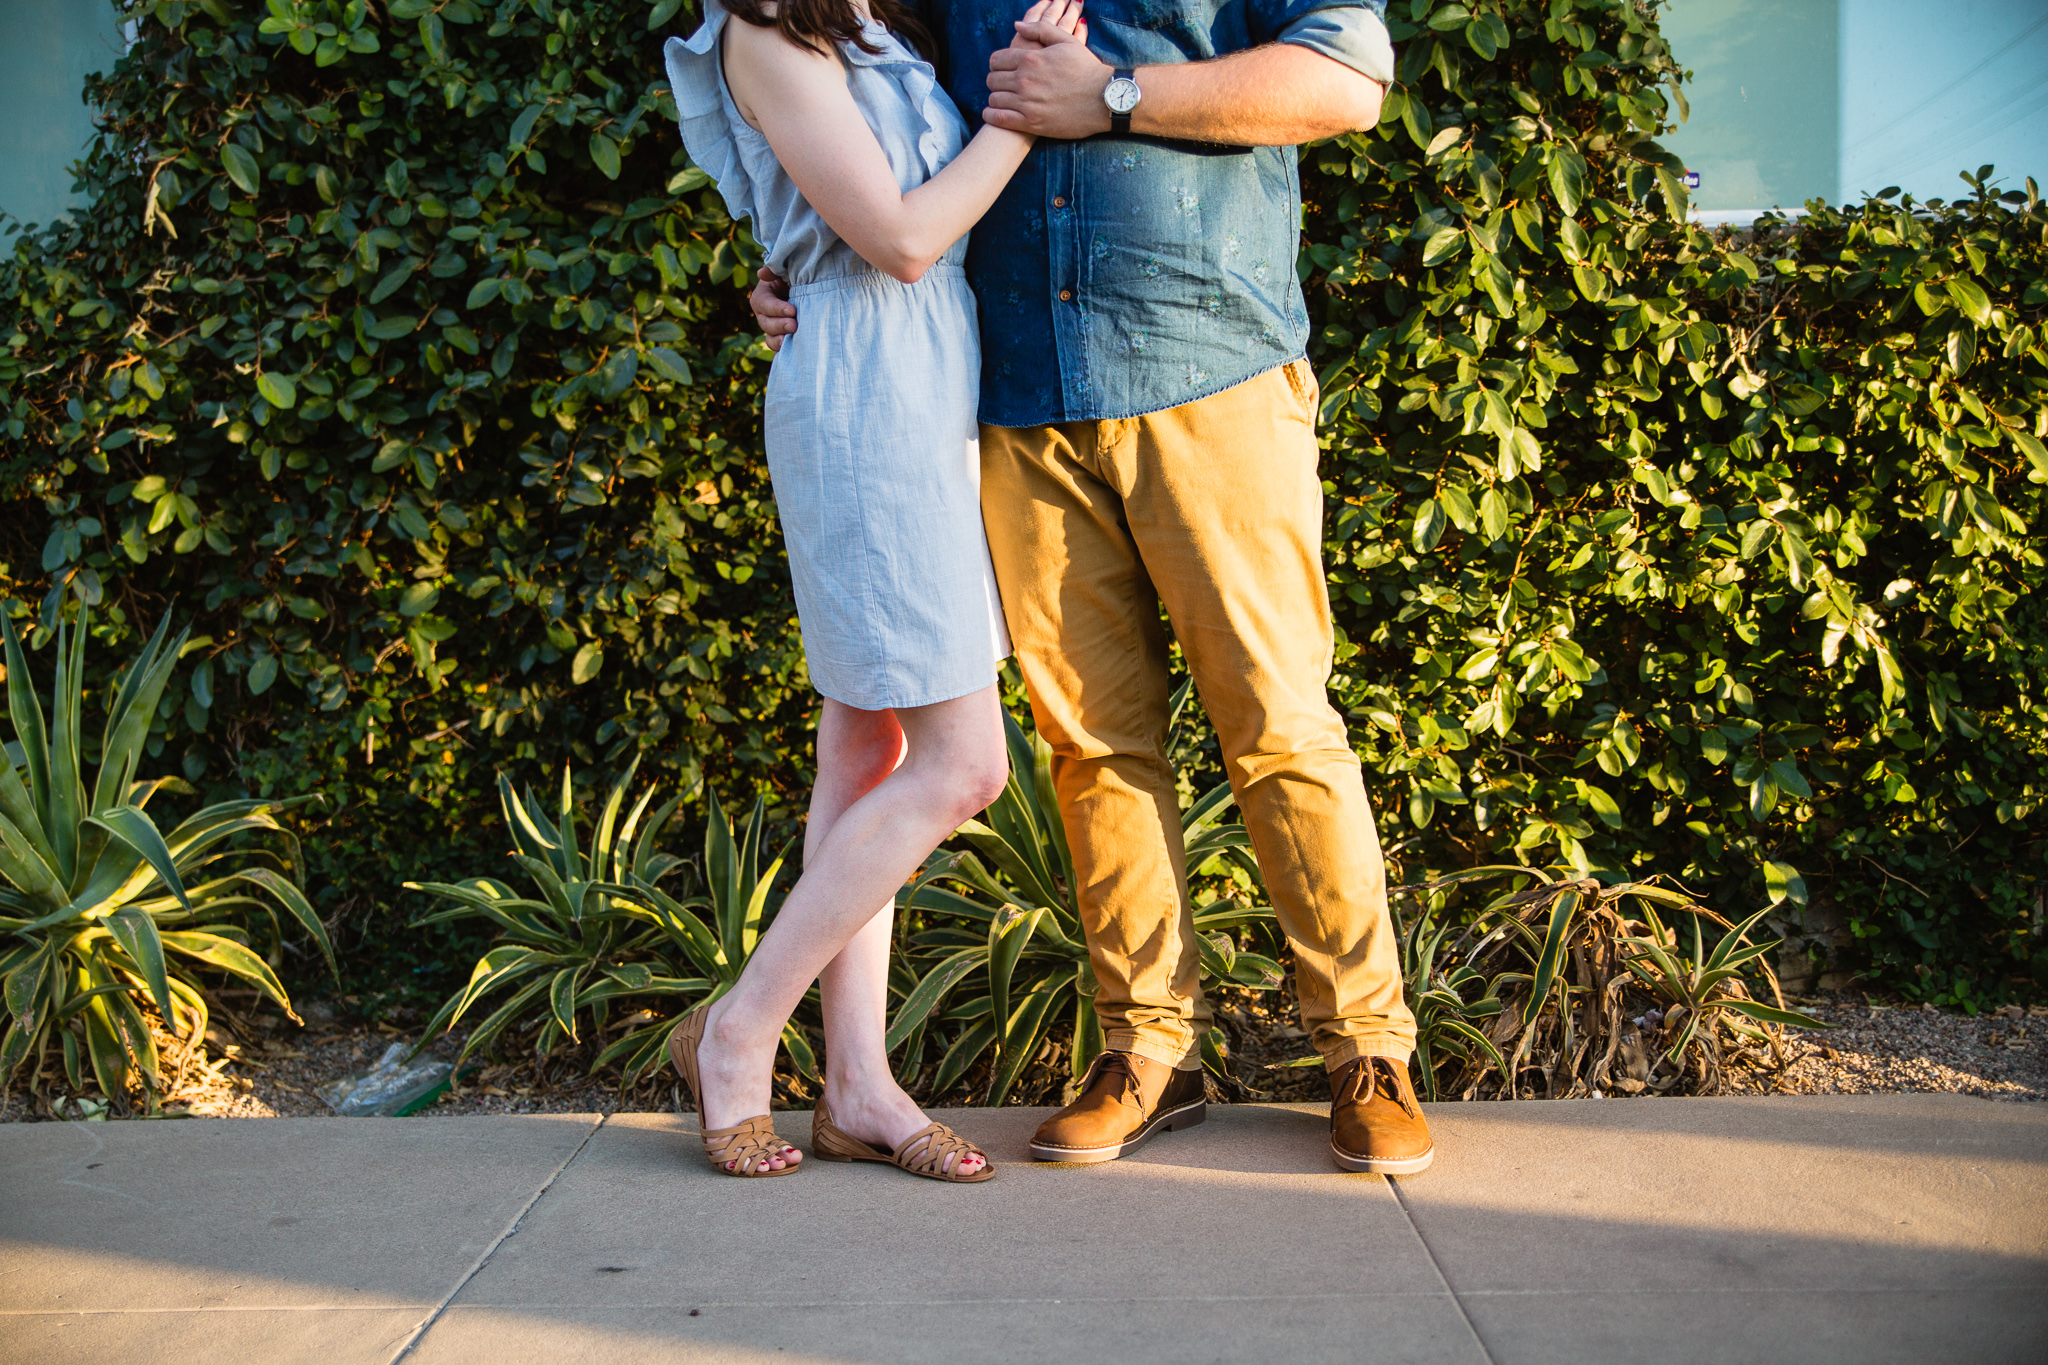 Couple's vintage inspired blue and tan engagement session outfit by PMA Photography.